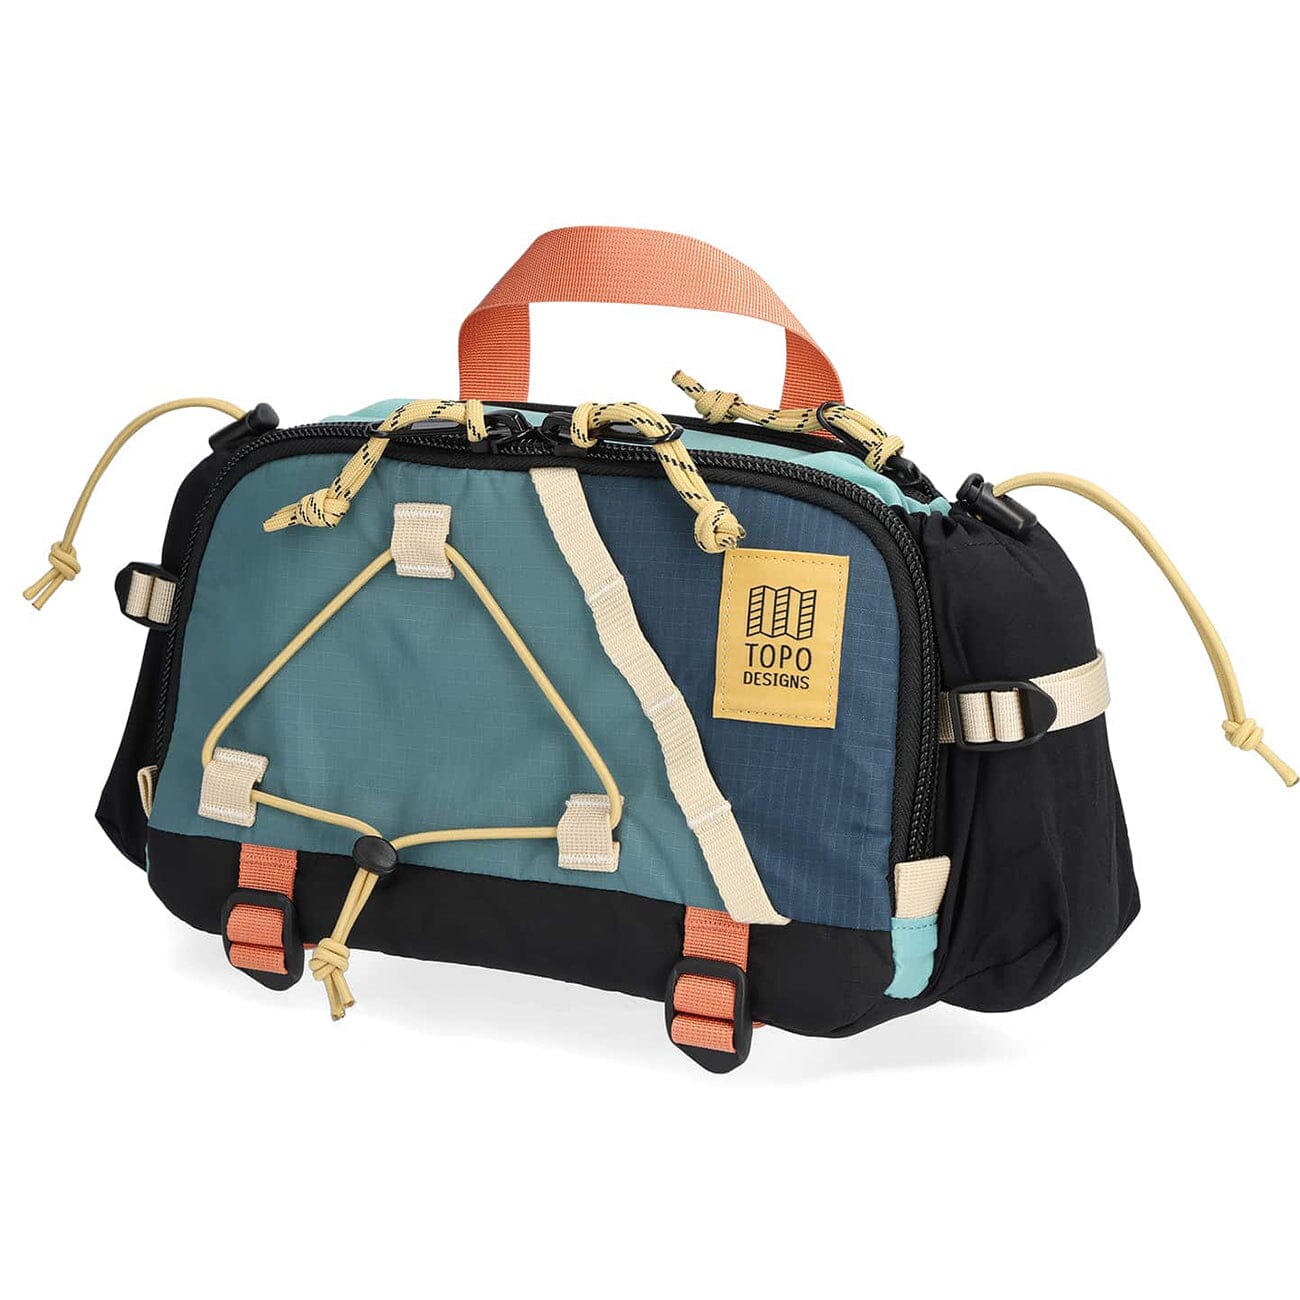 topo designs mountain hydro hip pack 4.4L geode green sea pine color side